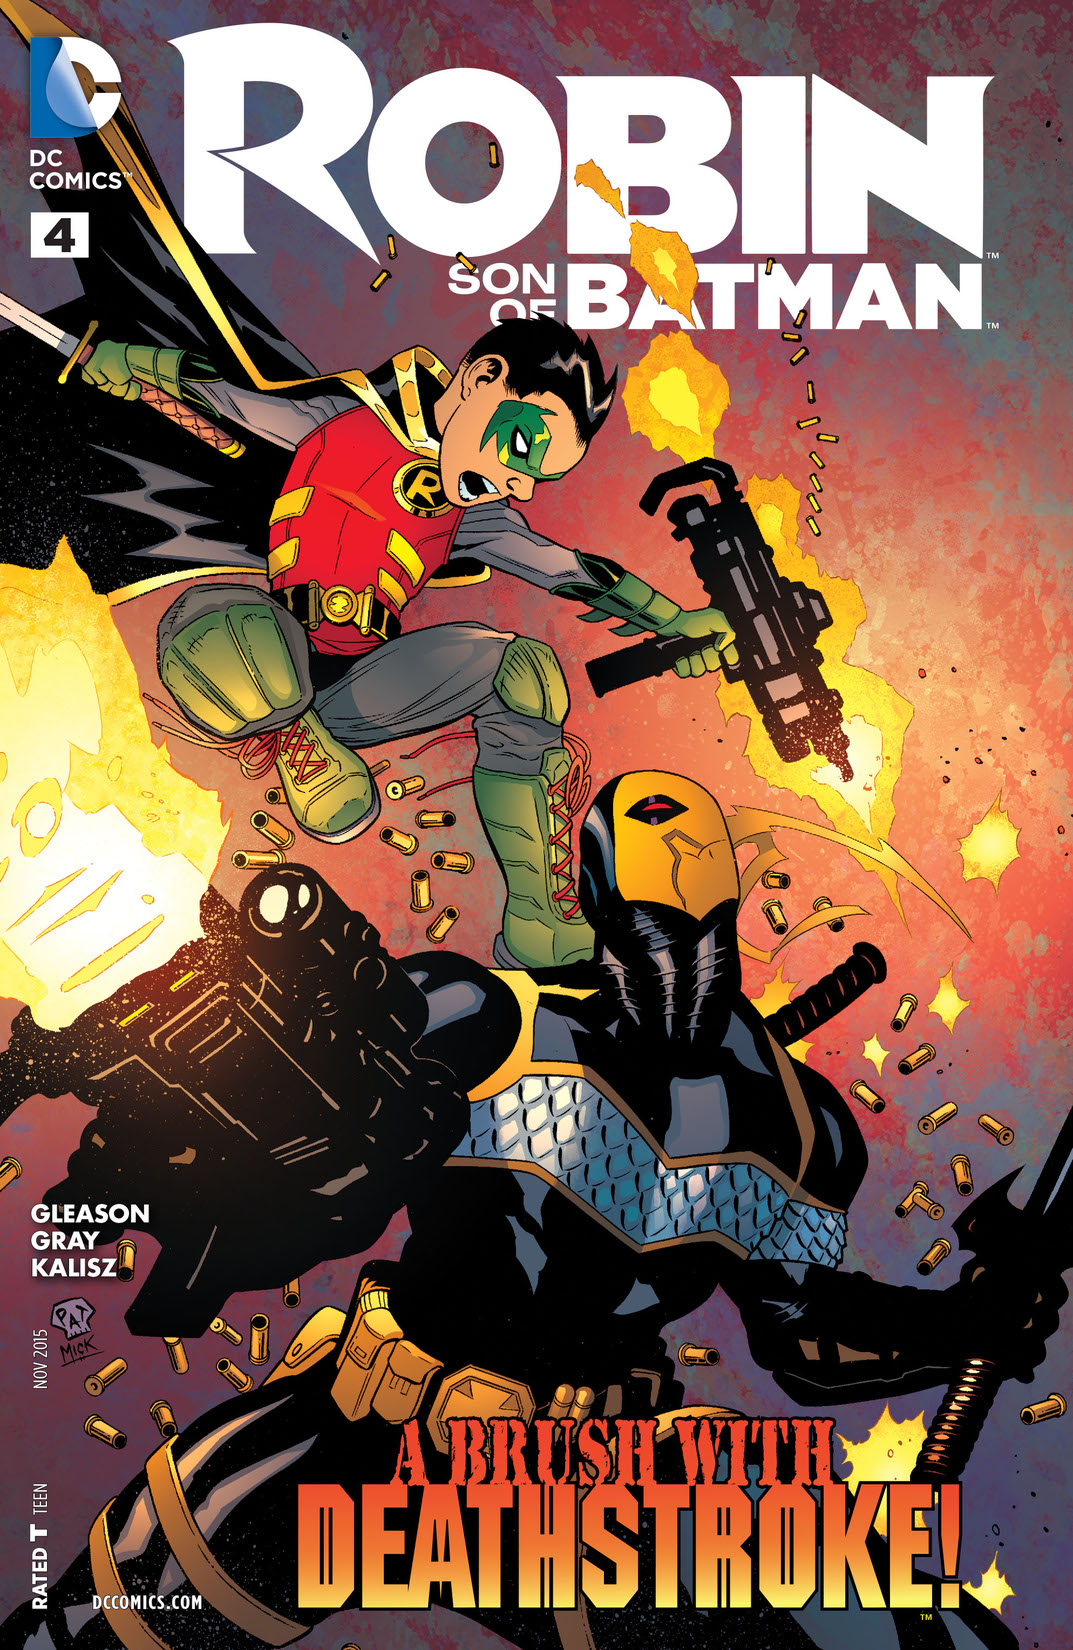 Robin: Son of Batman #4 preview images